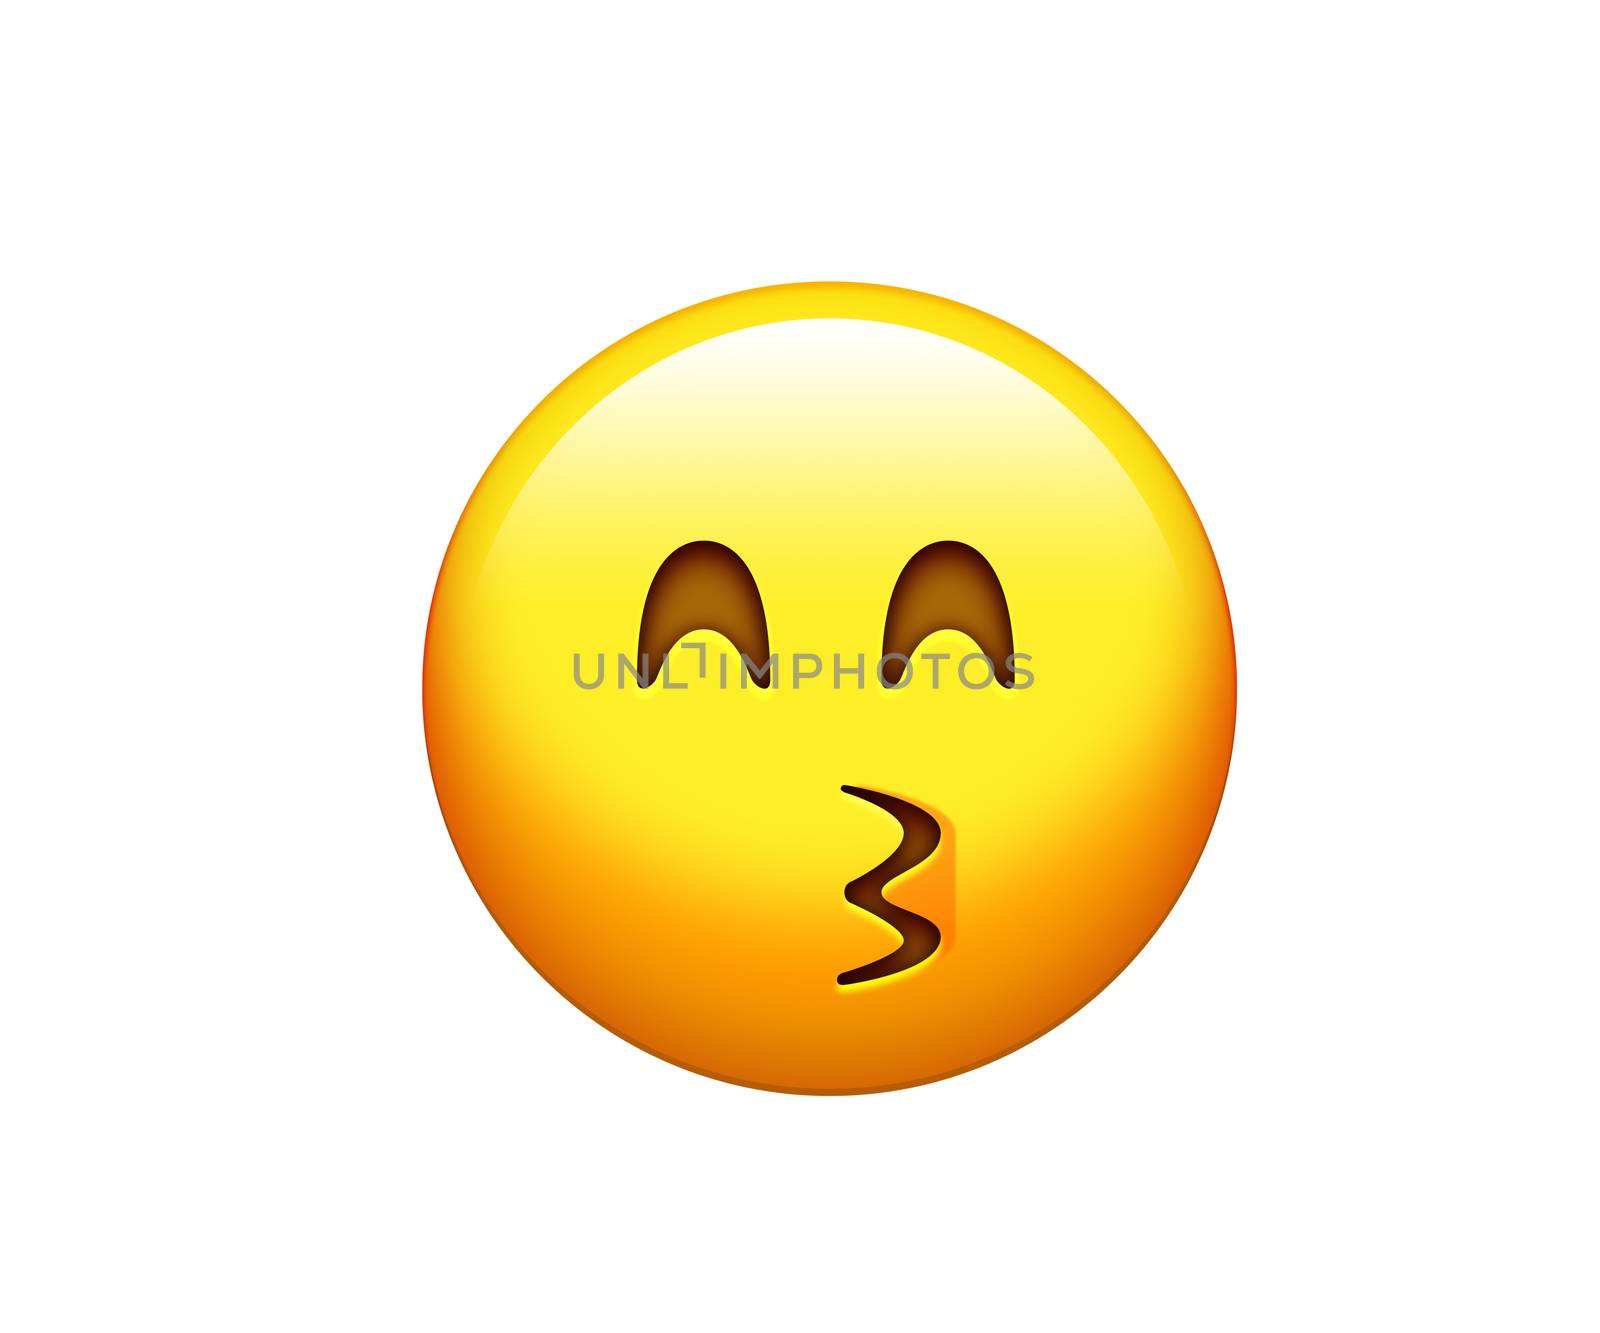 Isolated yellow smiley face with kissing mouth icon by cougarsan